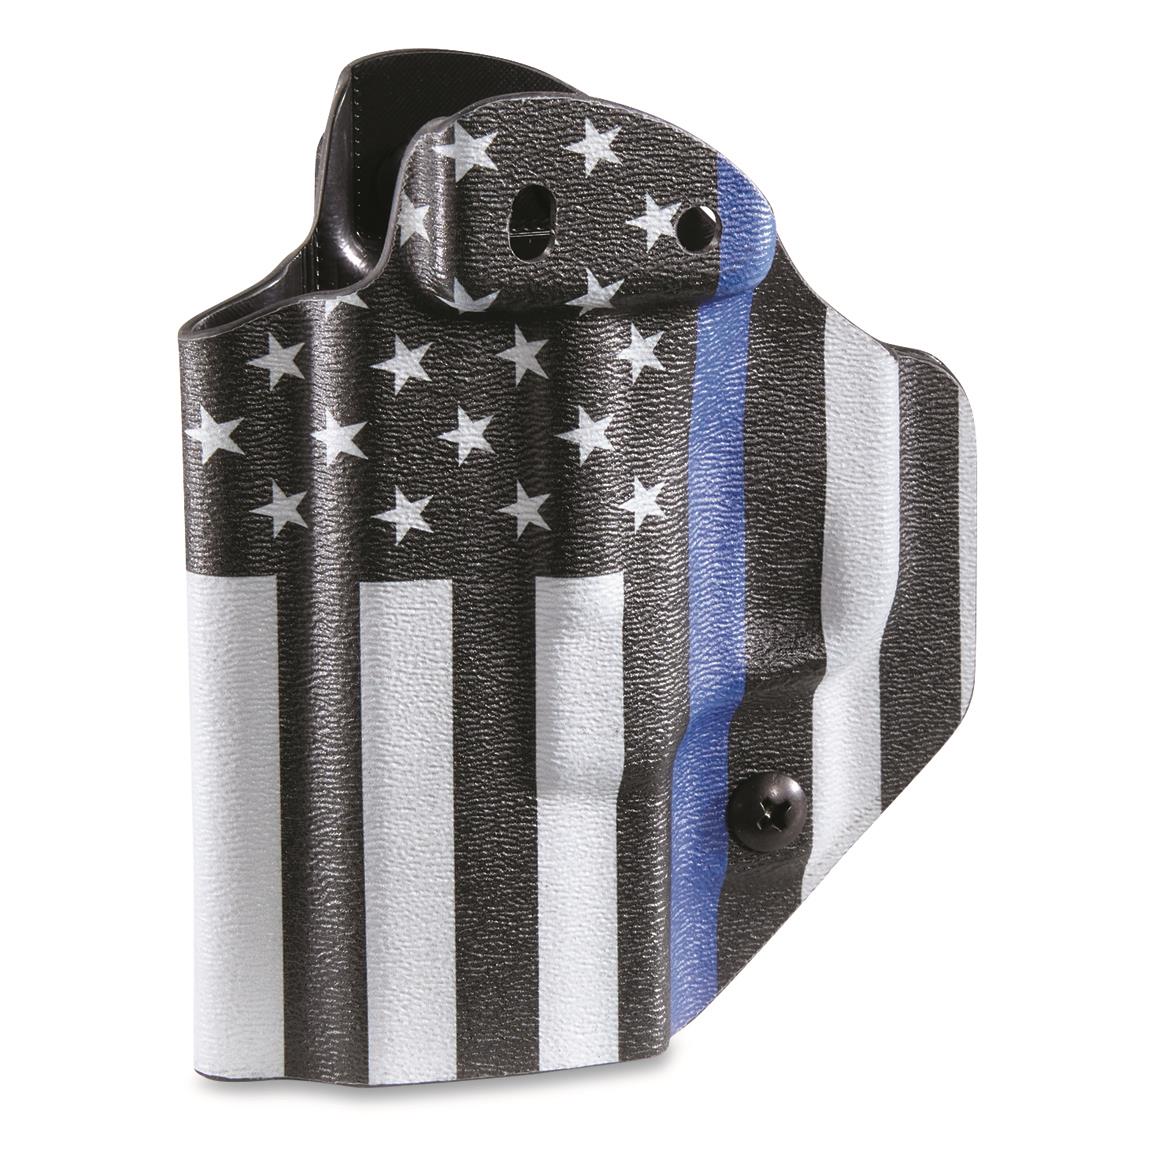 Mission First Tactical Ambidextrous Appendix IWB/OWB Holster, Springfield Hellcat, Thin Blue Line